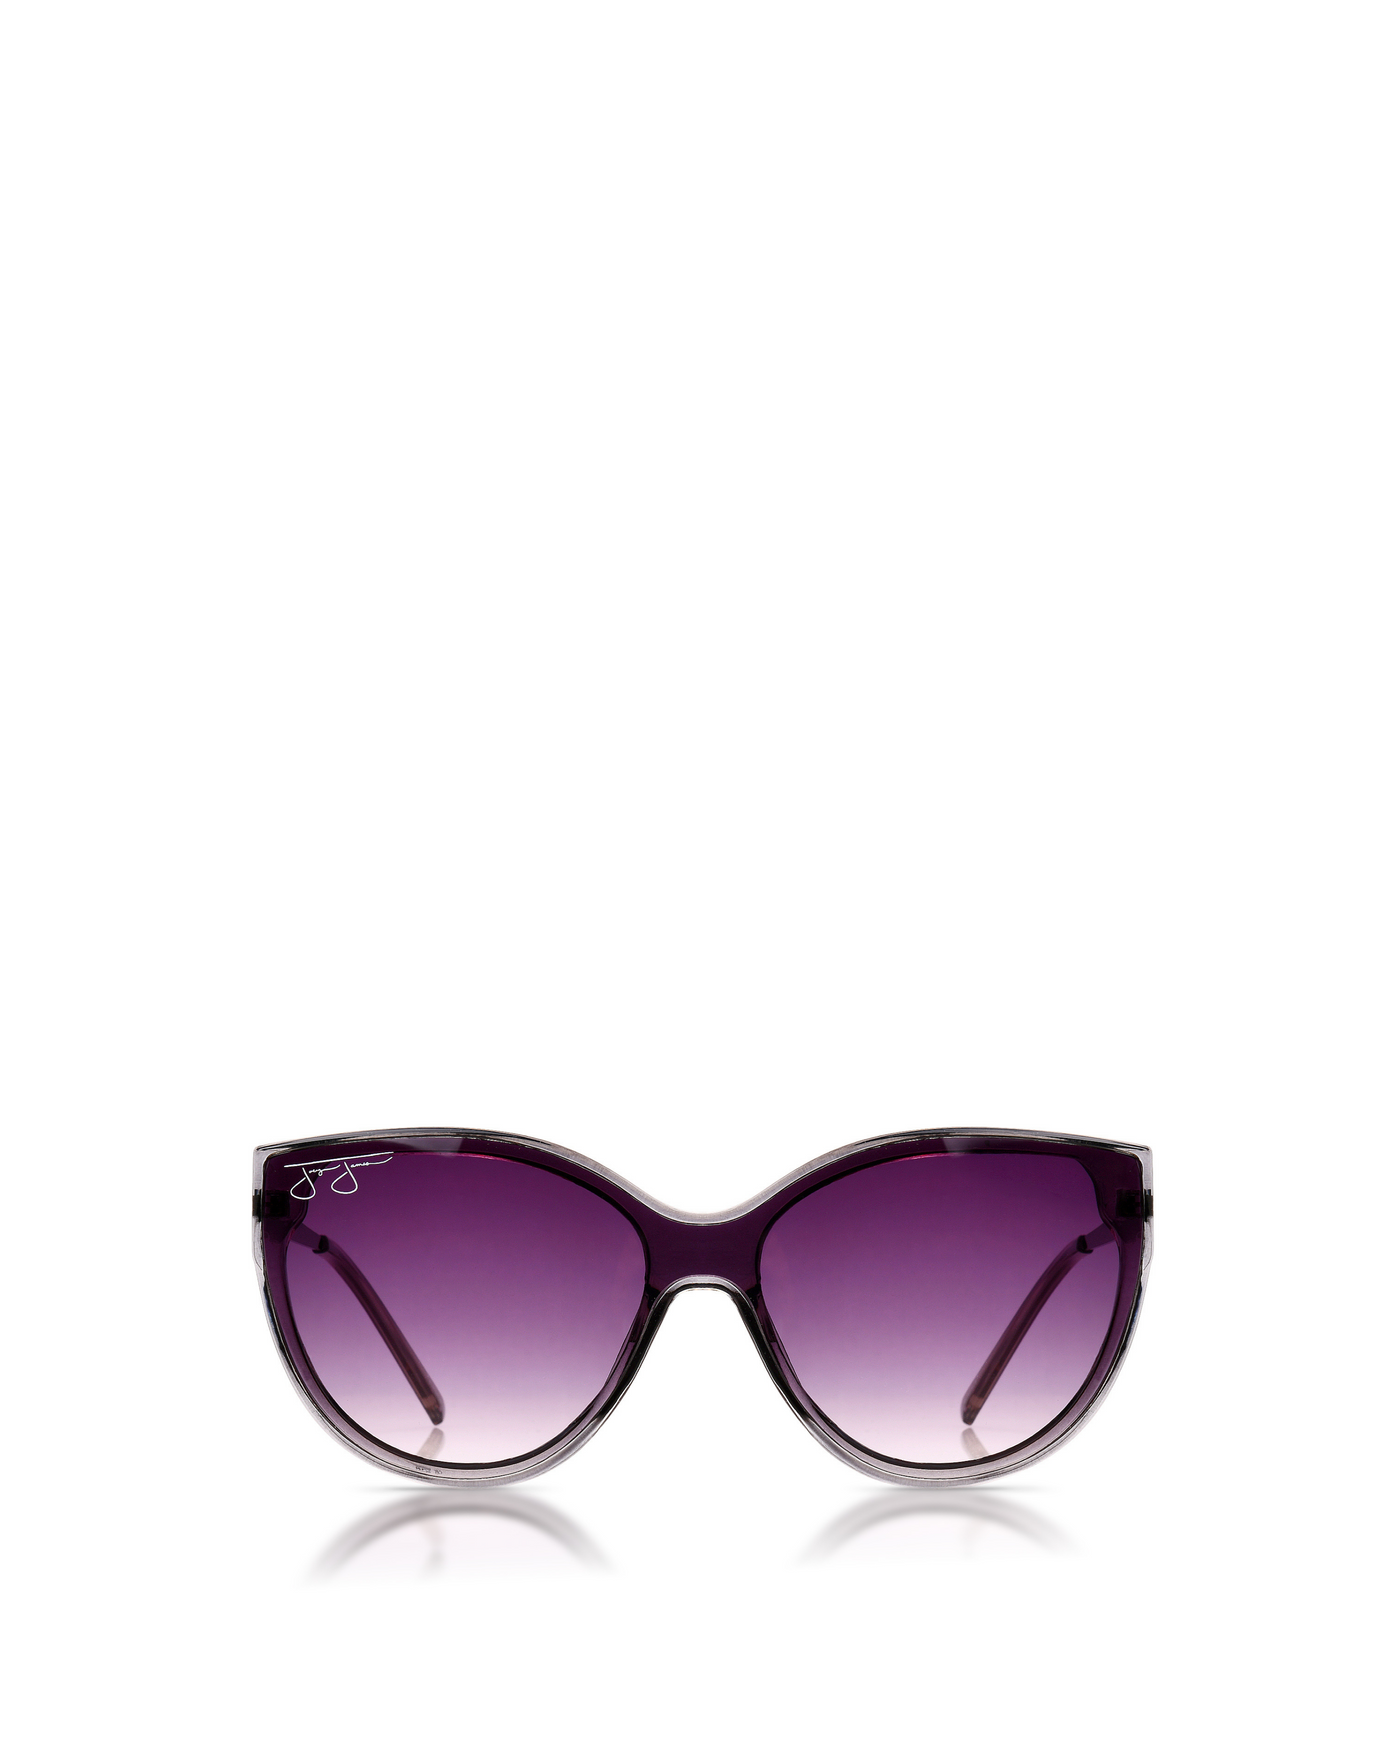 Oversized Cat Eye Sunglasses - Clear Frame with Smoke Lens Sunglasses Joey James, The Label   